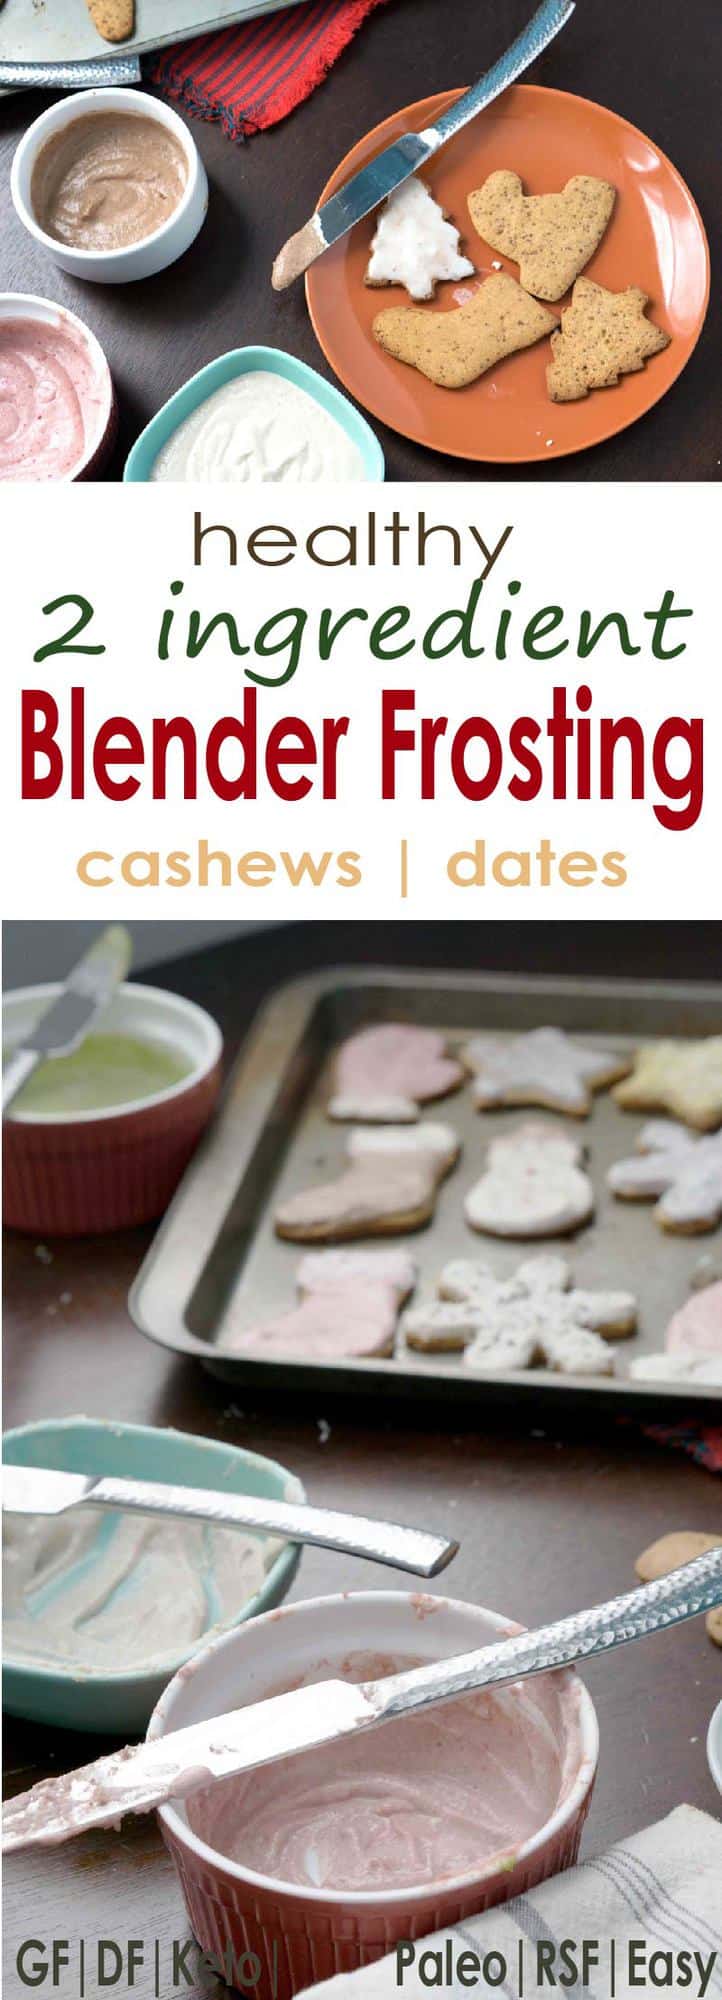 Finally, a cut-out cookie frosting without powdered sugar! With just 2 ingredients, this healthy, paleo and naturally colored blender frosting is ready in just minutes. #glutenfree #dairyfree #paleo #keto #sugarfree #frosting